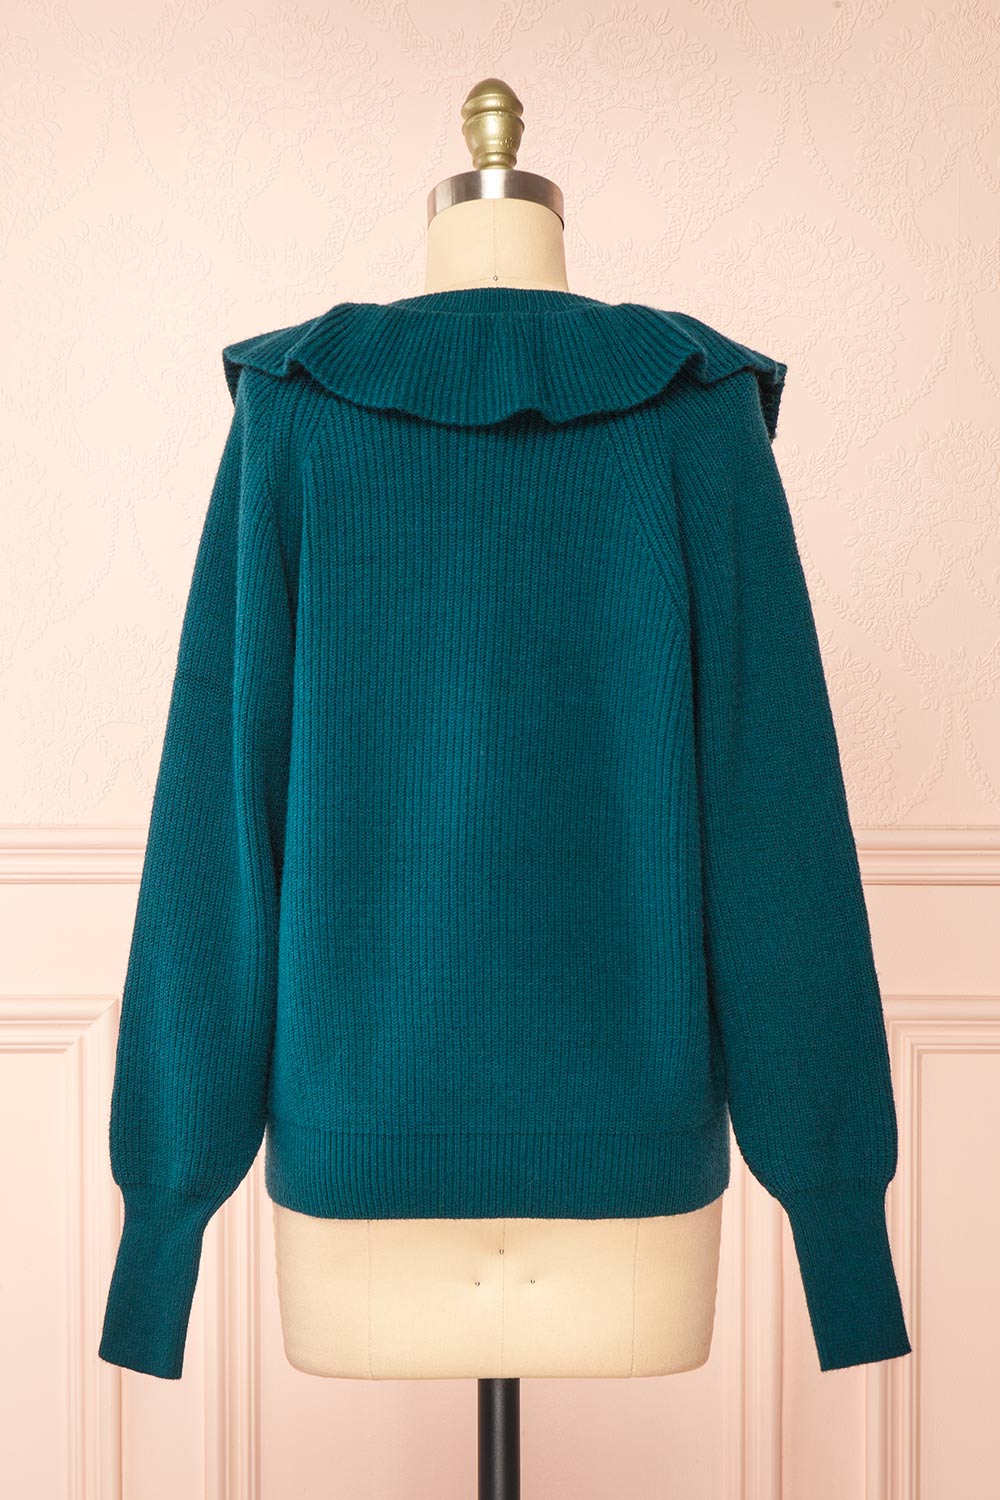 Miaro Teal Ruffled V-Neck Knit Sweater | Boutique 1861 back view